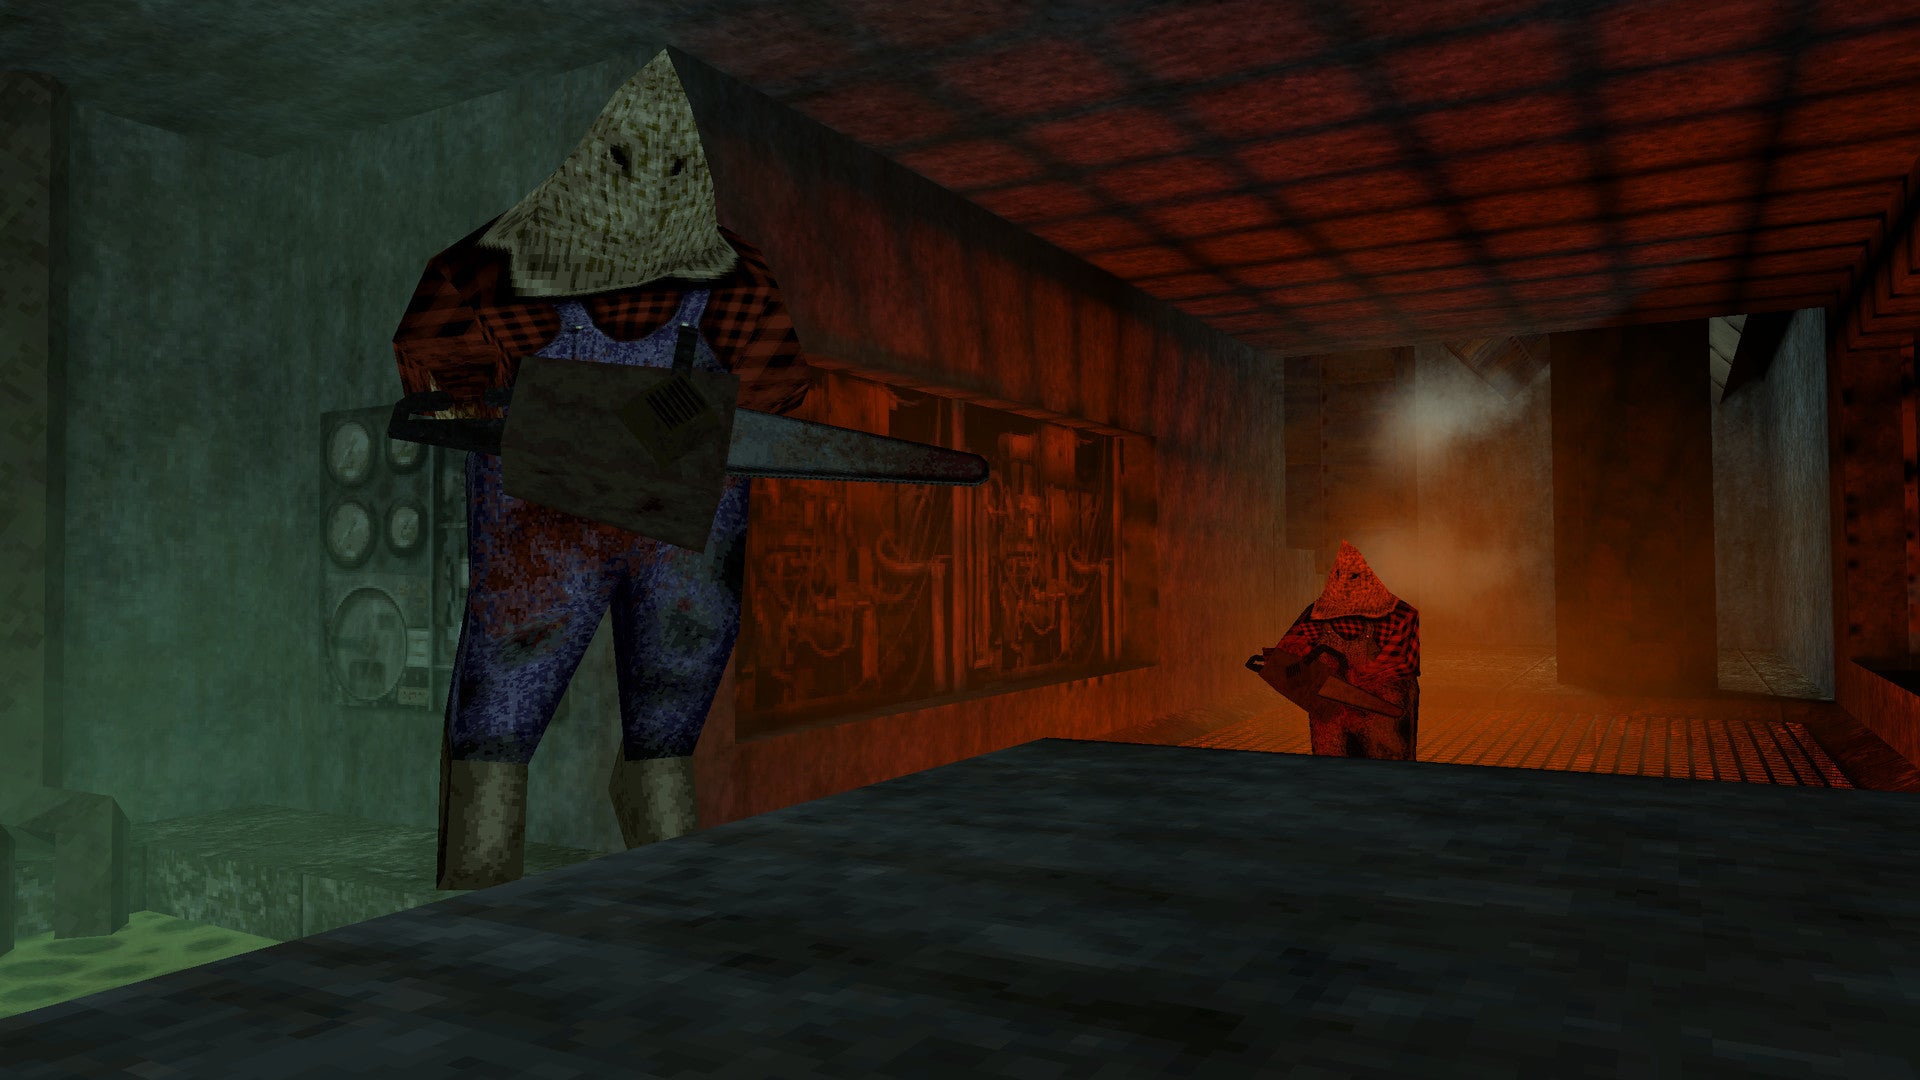 list of horror video games